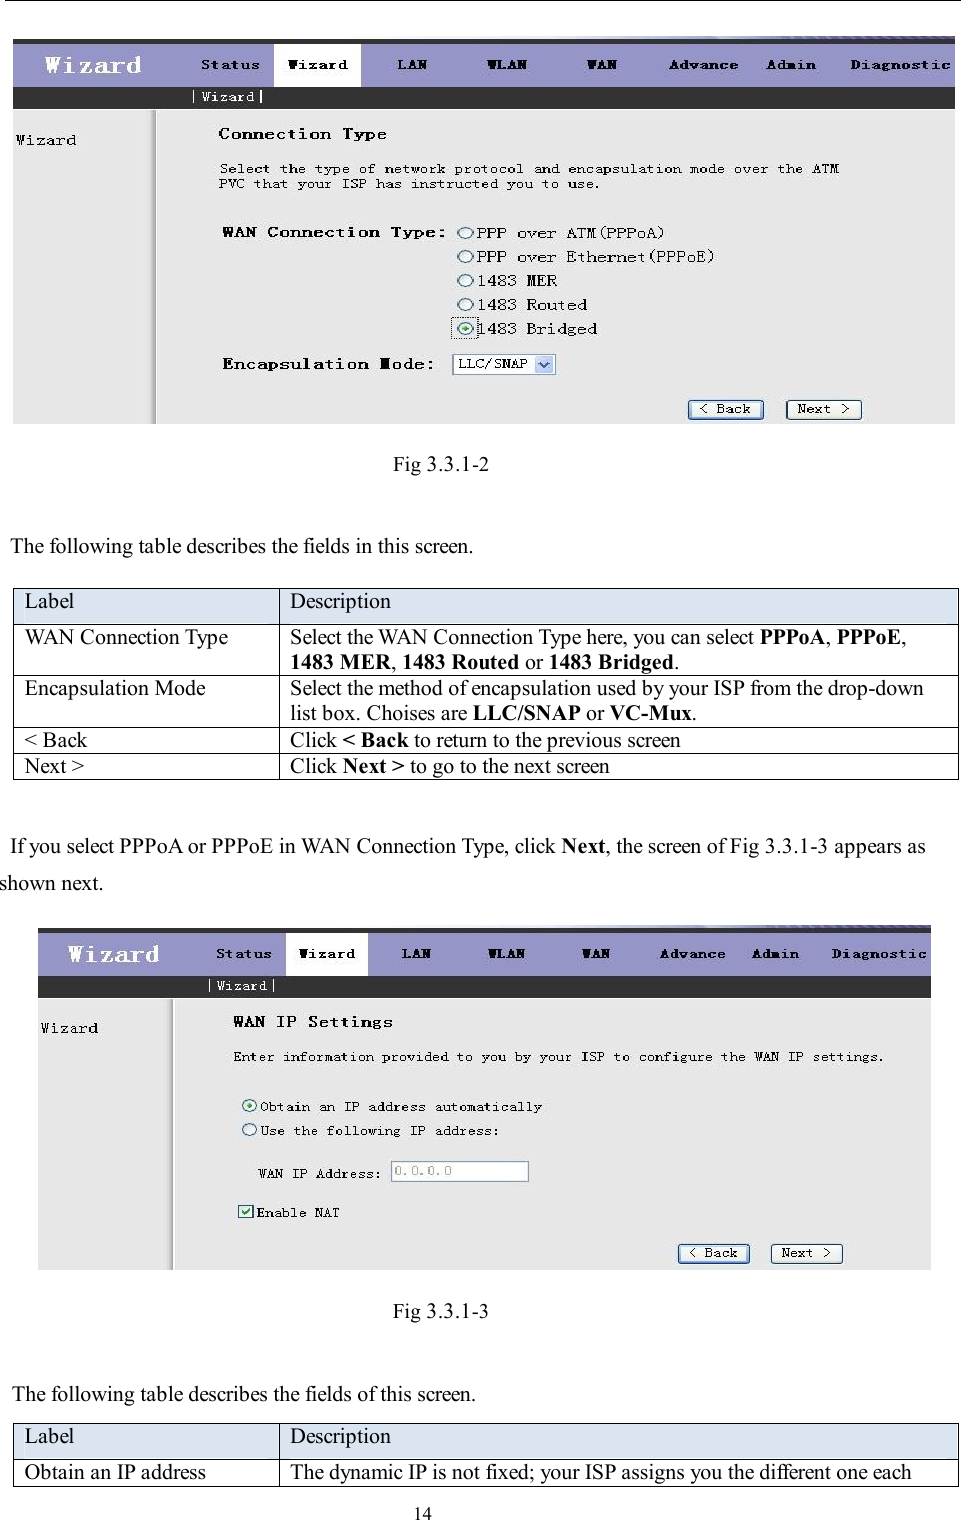                                                                     14  Fig 3.3.1-2  The following table describes the fields in this screen. Label  Description WAN Connection Type  Select the WAN Connection Type here, you can select PPPoA, PPPoE, 1483 MER, 1483 Routed or 1483 Bridged. Encapsulation Mode  Select the method of encapsulation used by your ISP from the drop-down list box. Choises are LLC/SNAP or VC-Mux. &lt; Back  Click &lt; Back to return to the previous screen Next &gt;  Click Next &gt; to go to the next screen  If you select PPPoA or PPPoE in WAN Connection Type, click Next, the screen of Fig 3.3.1-3 appears as shown next.  Fig 3.3.1-3    The following table describes the fields of this screen. Label  Description Obtain an IP address The dynamic IP is not fixed; your ISP assigns you the different one each 